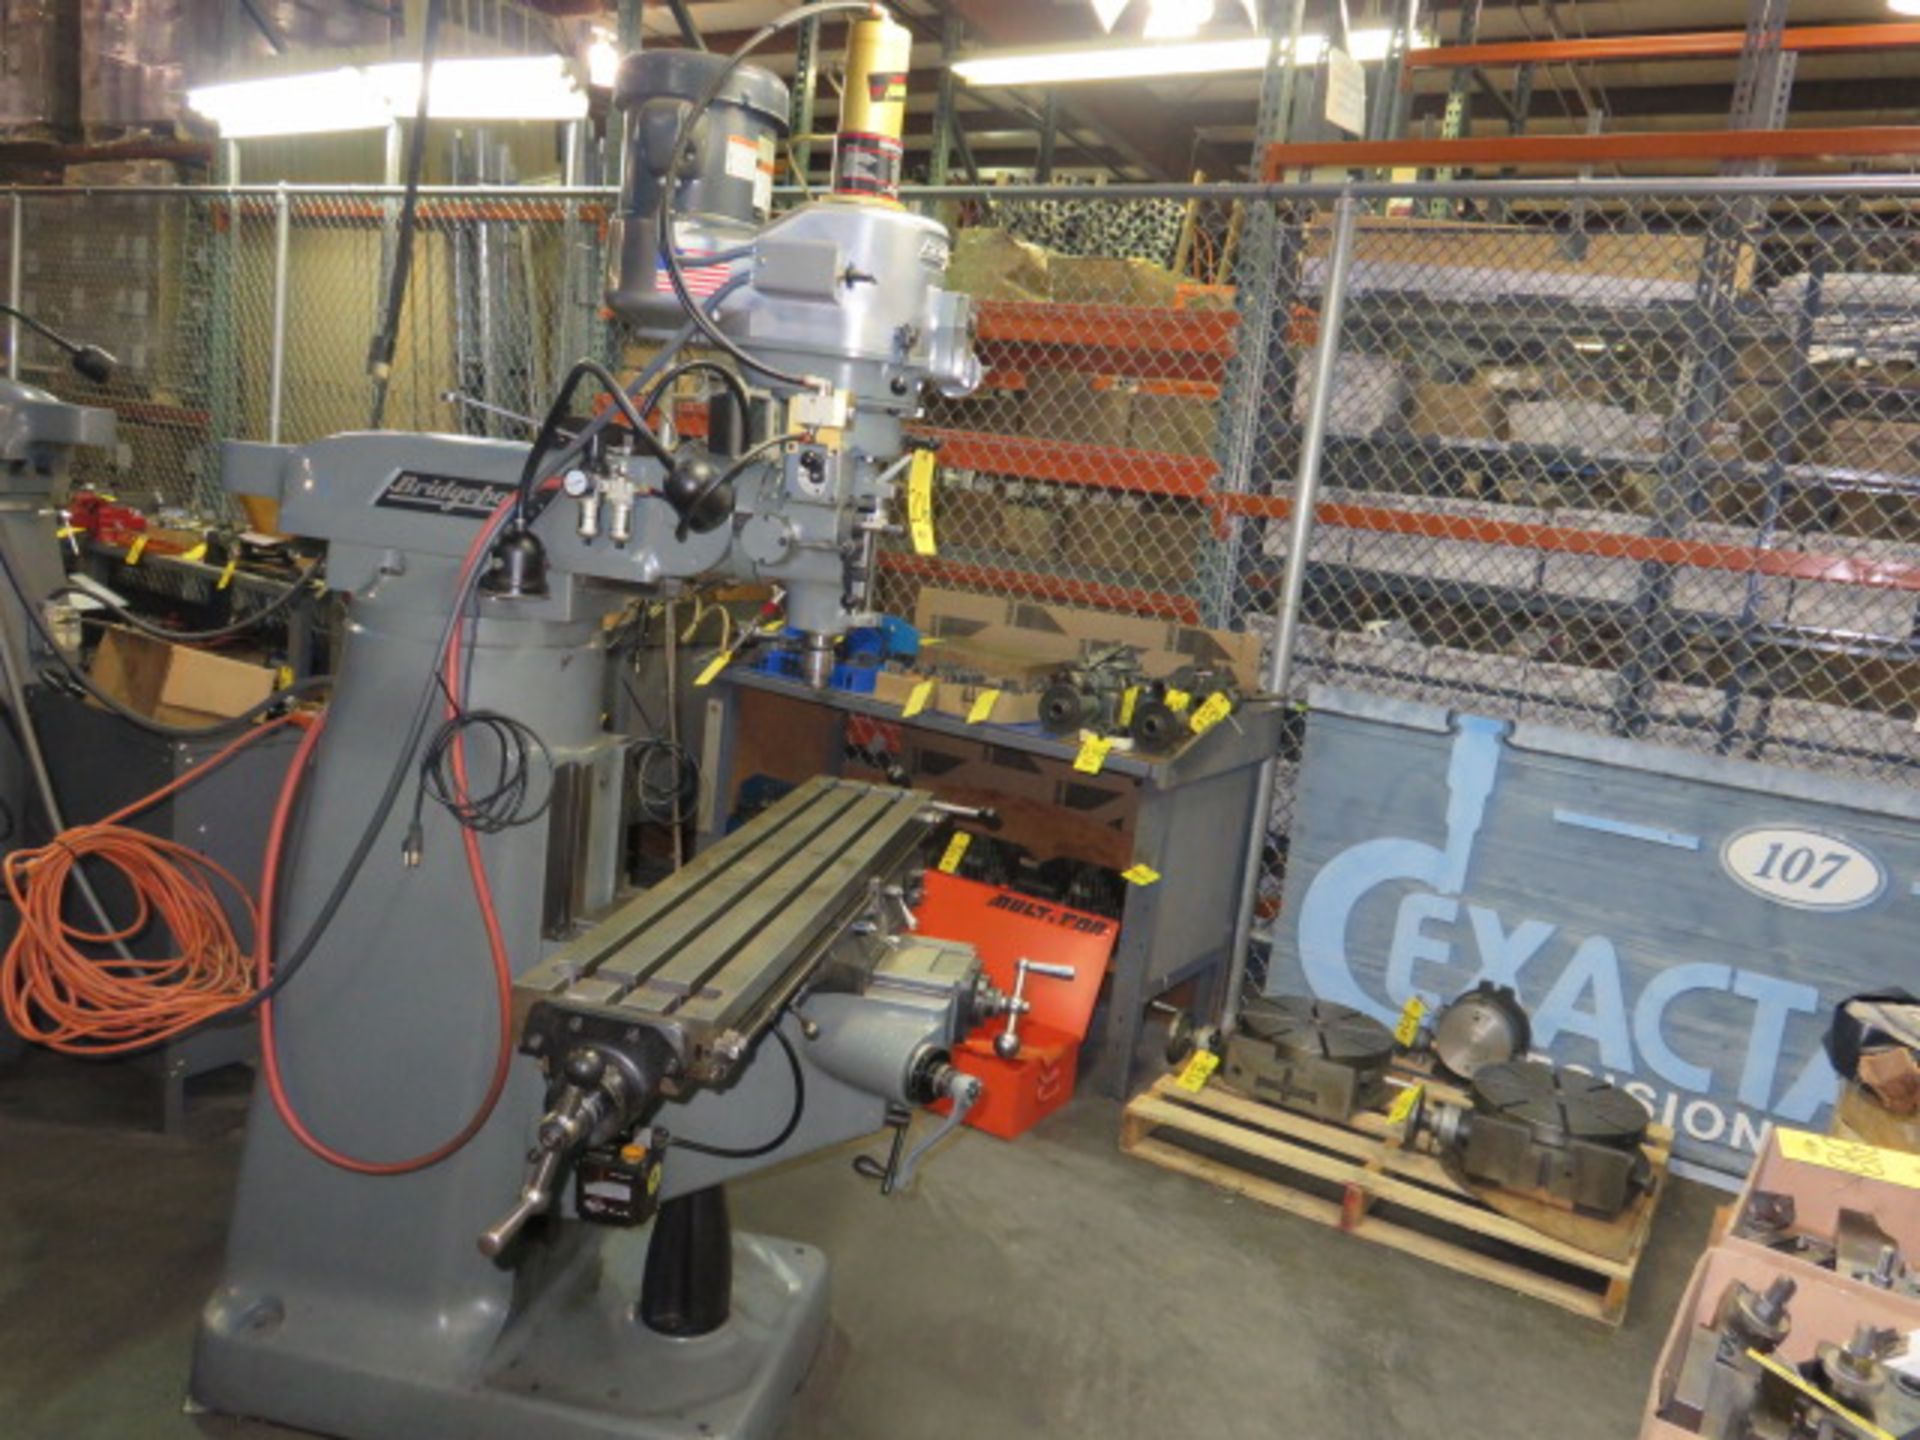 2008 BRIDGEPORT (HARDINGE) 2J VS VERTICAL MILL, S/N HDNG 3926, 2HP, 9 IN. X 48 IN. PF TABLE WITH… - Image 4 of 5